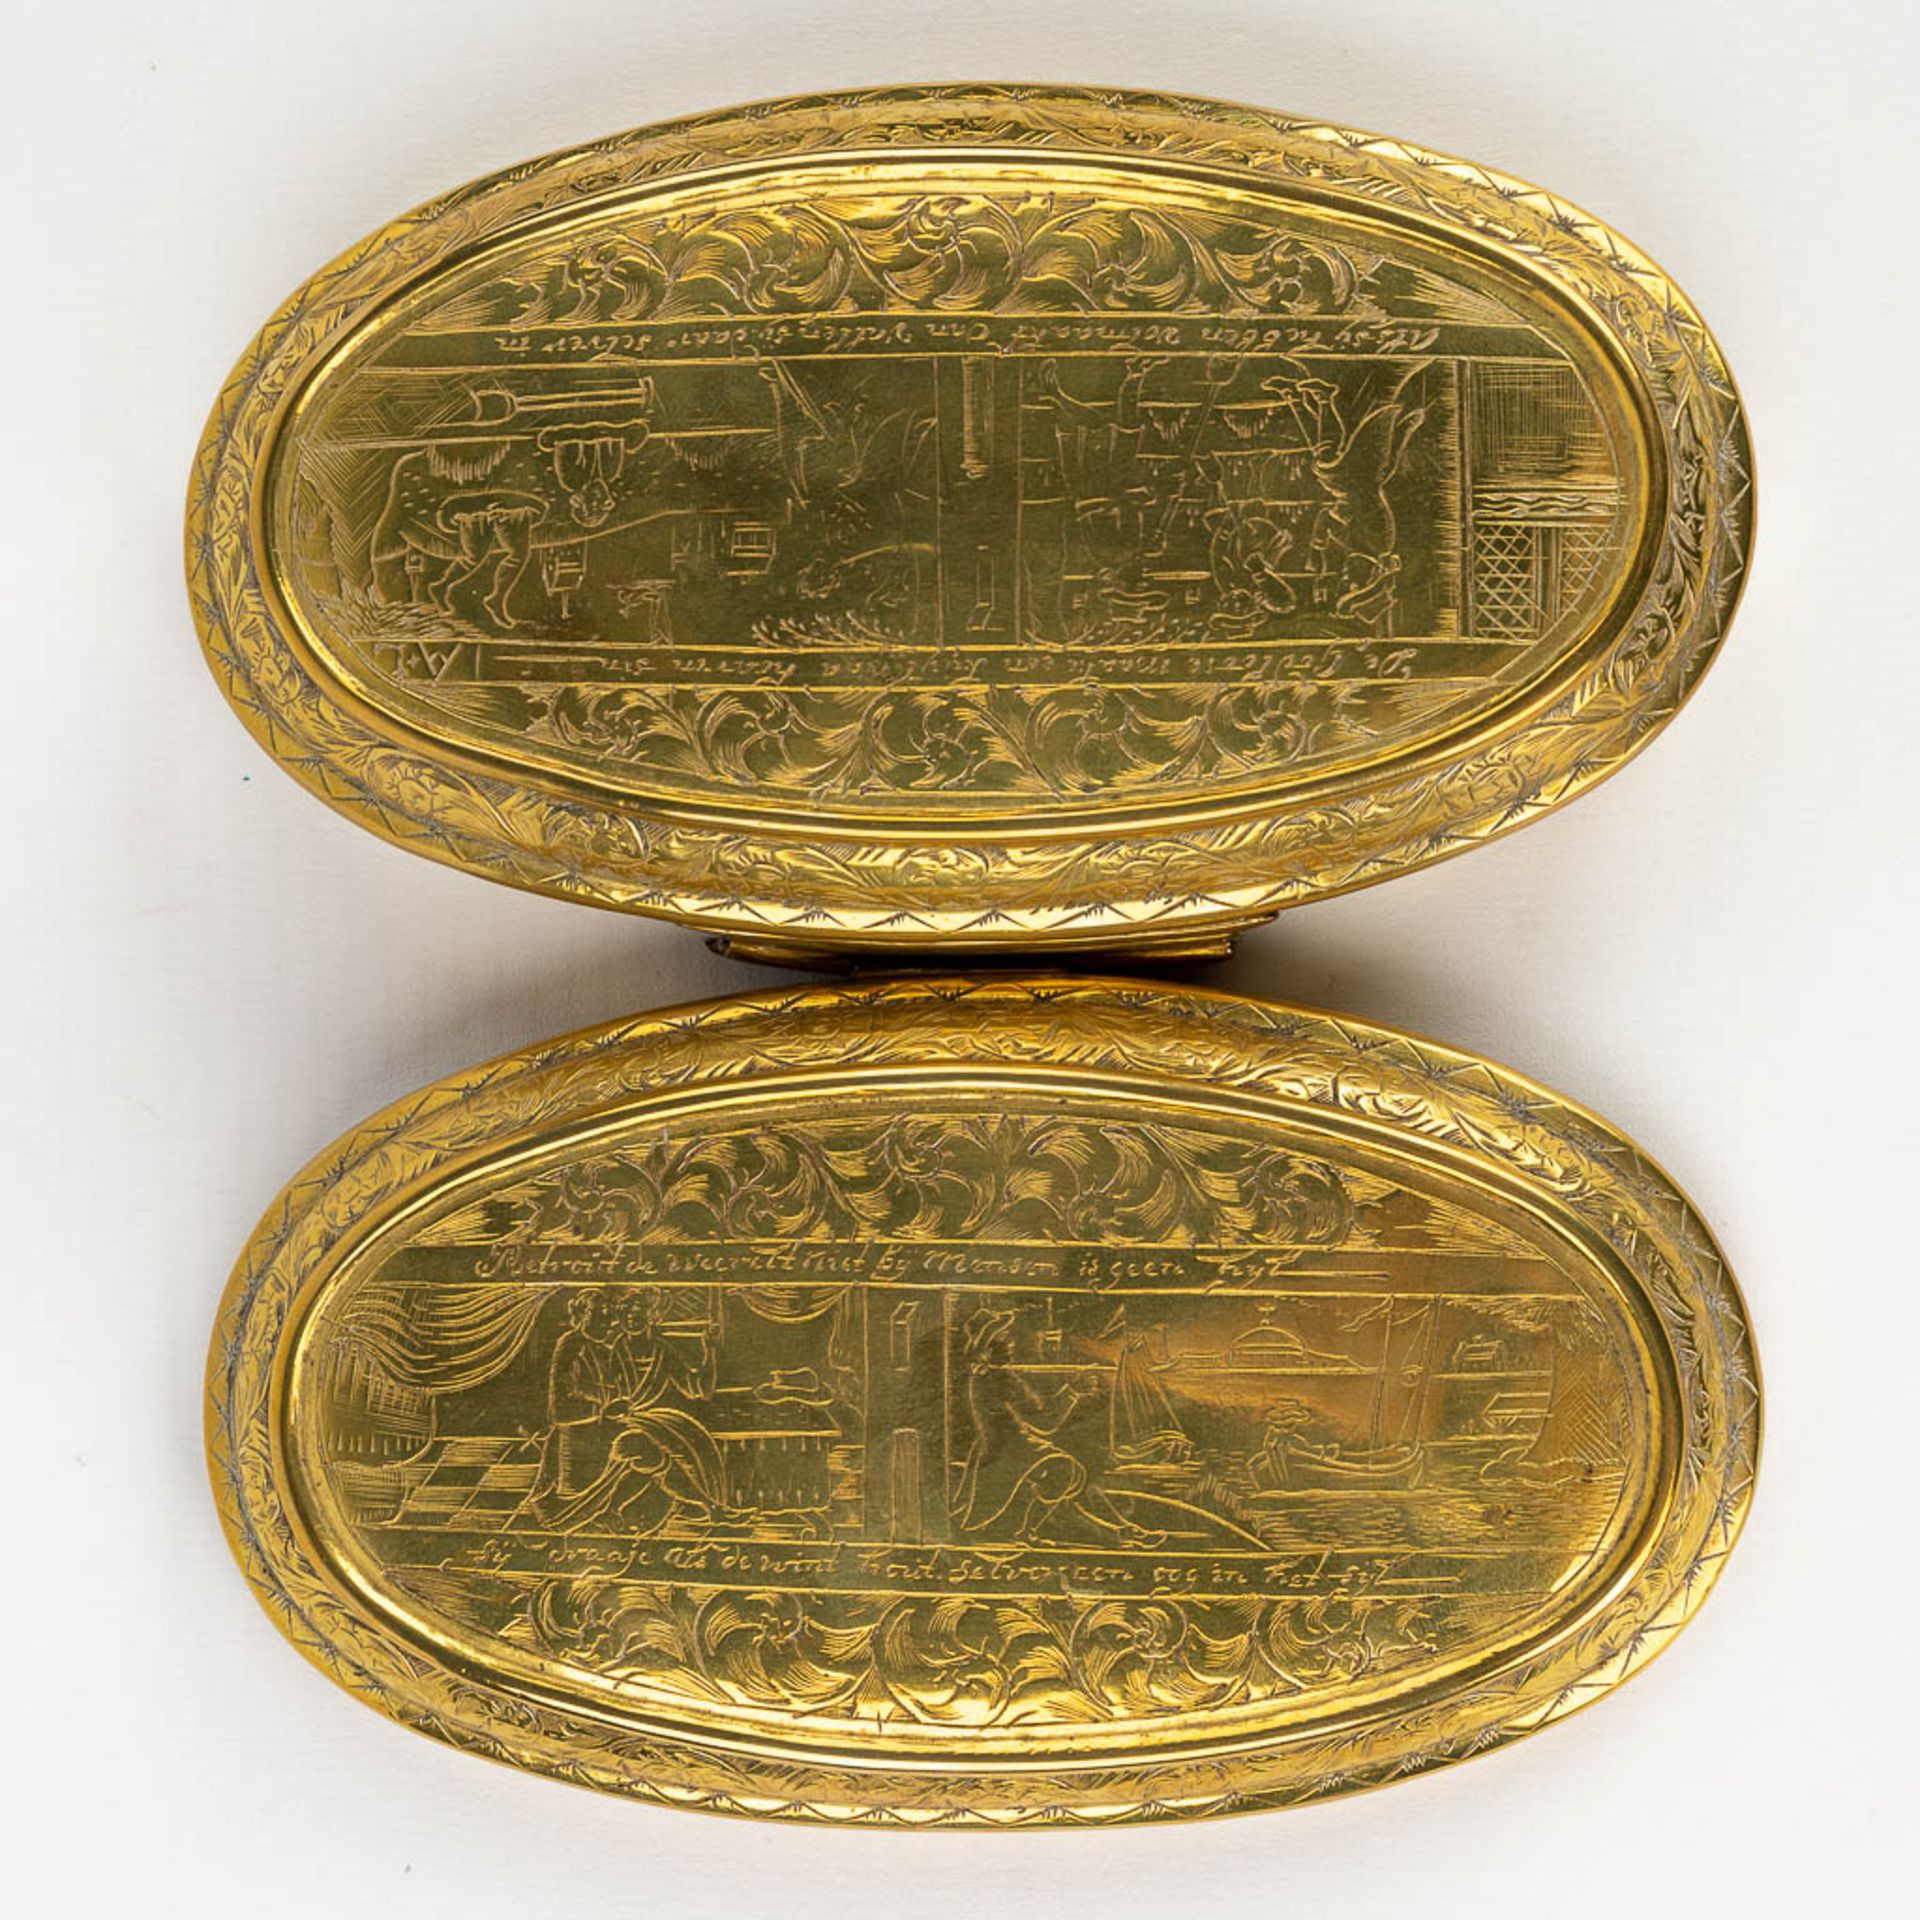 A collection of 2 antique tobacco boxes, made of copper. 18th C. (L: 7,5 x W: 13,7 x H: 3,7 cm) - Image 21 of 23